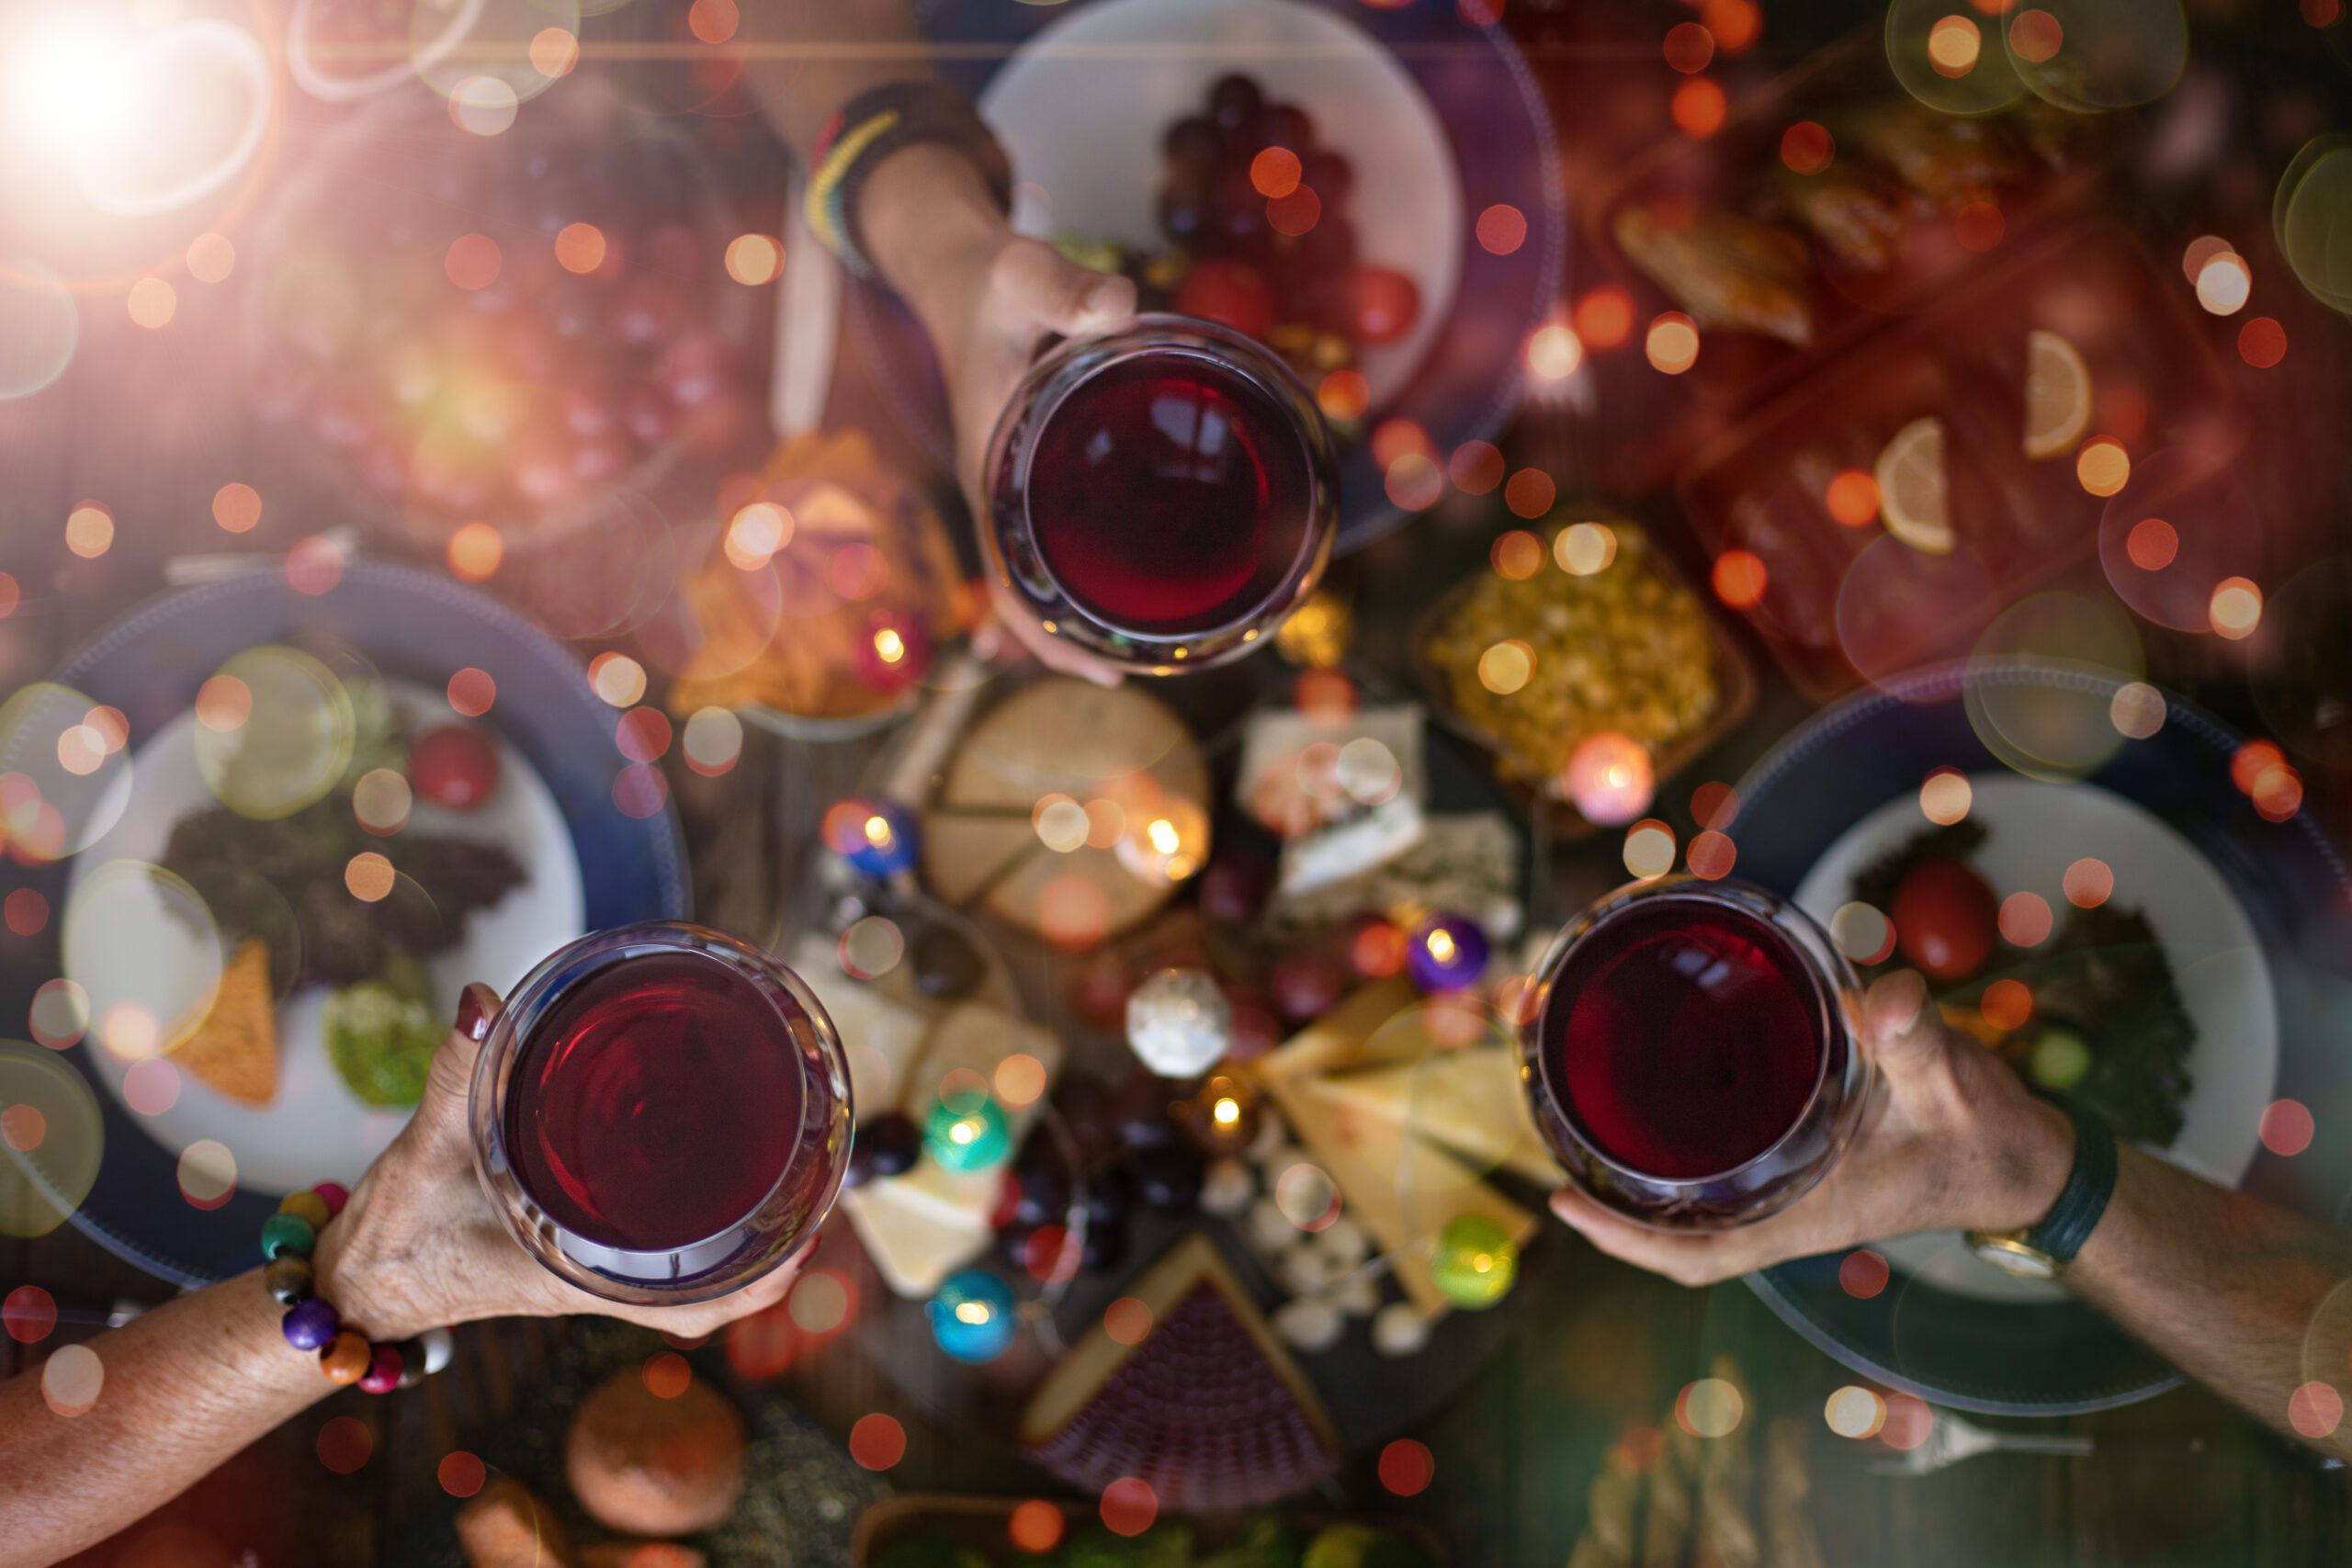 Top view of a family gathering together with wine over food